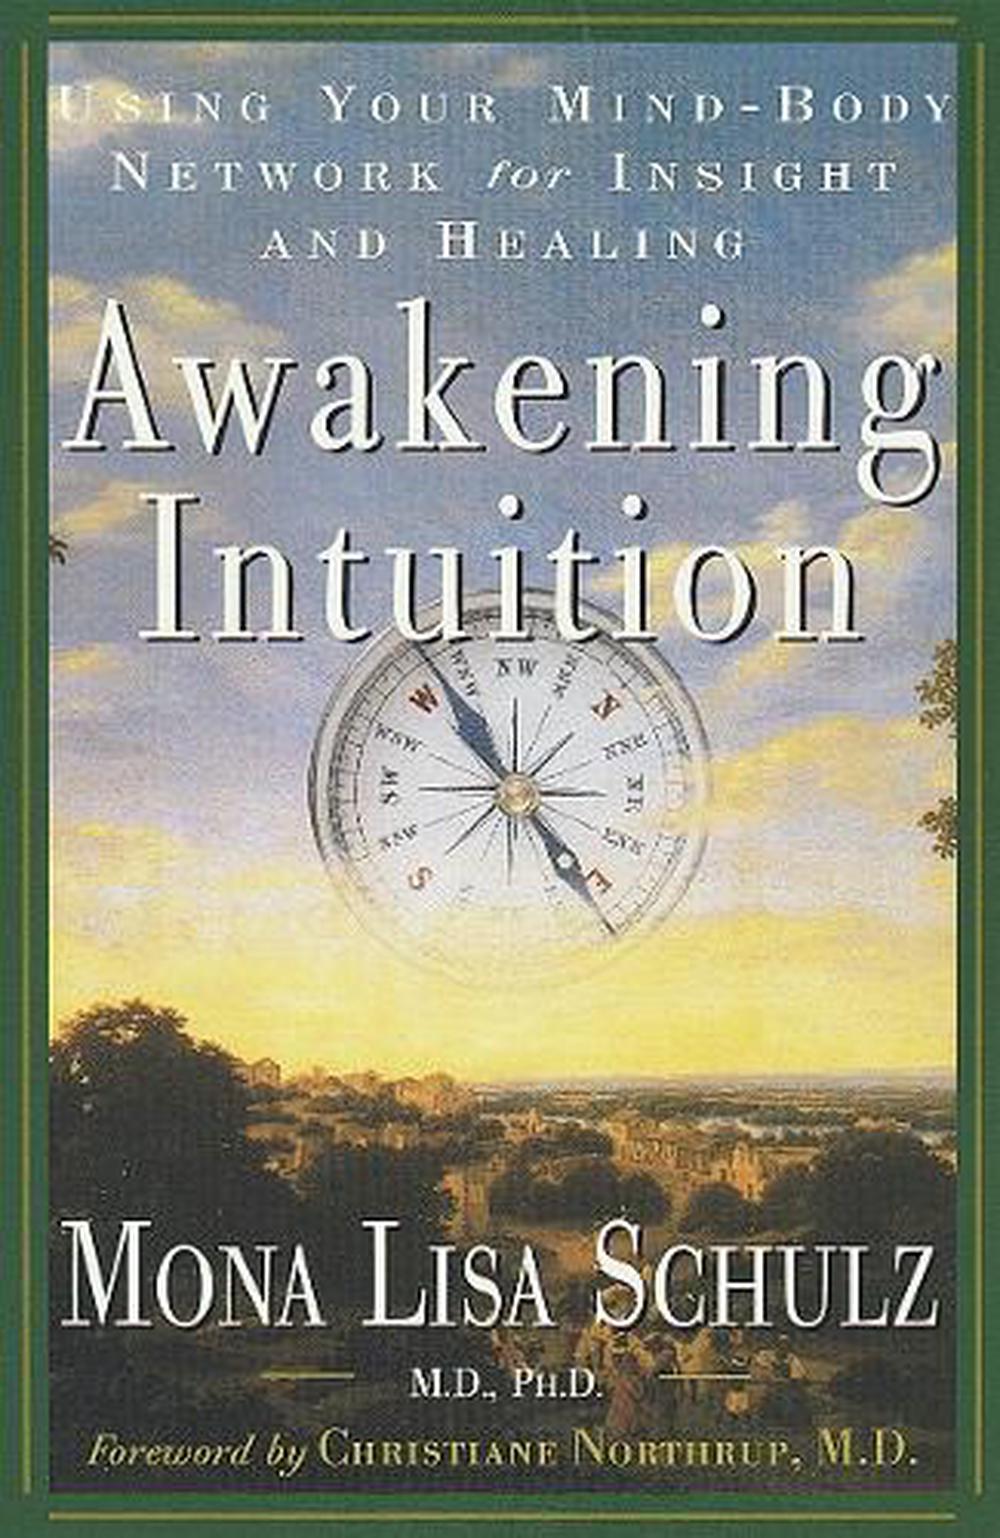 Awakening Intuition Using Your MindBody Network for Insight and